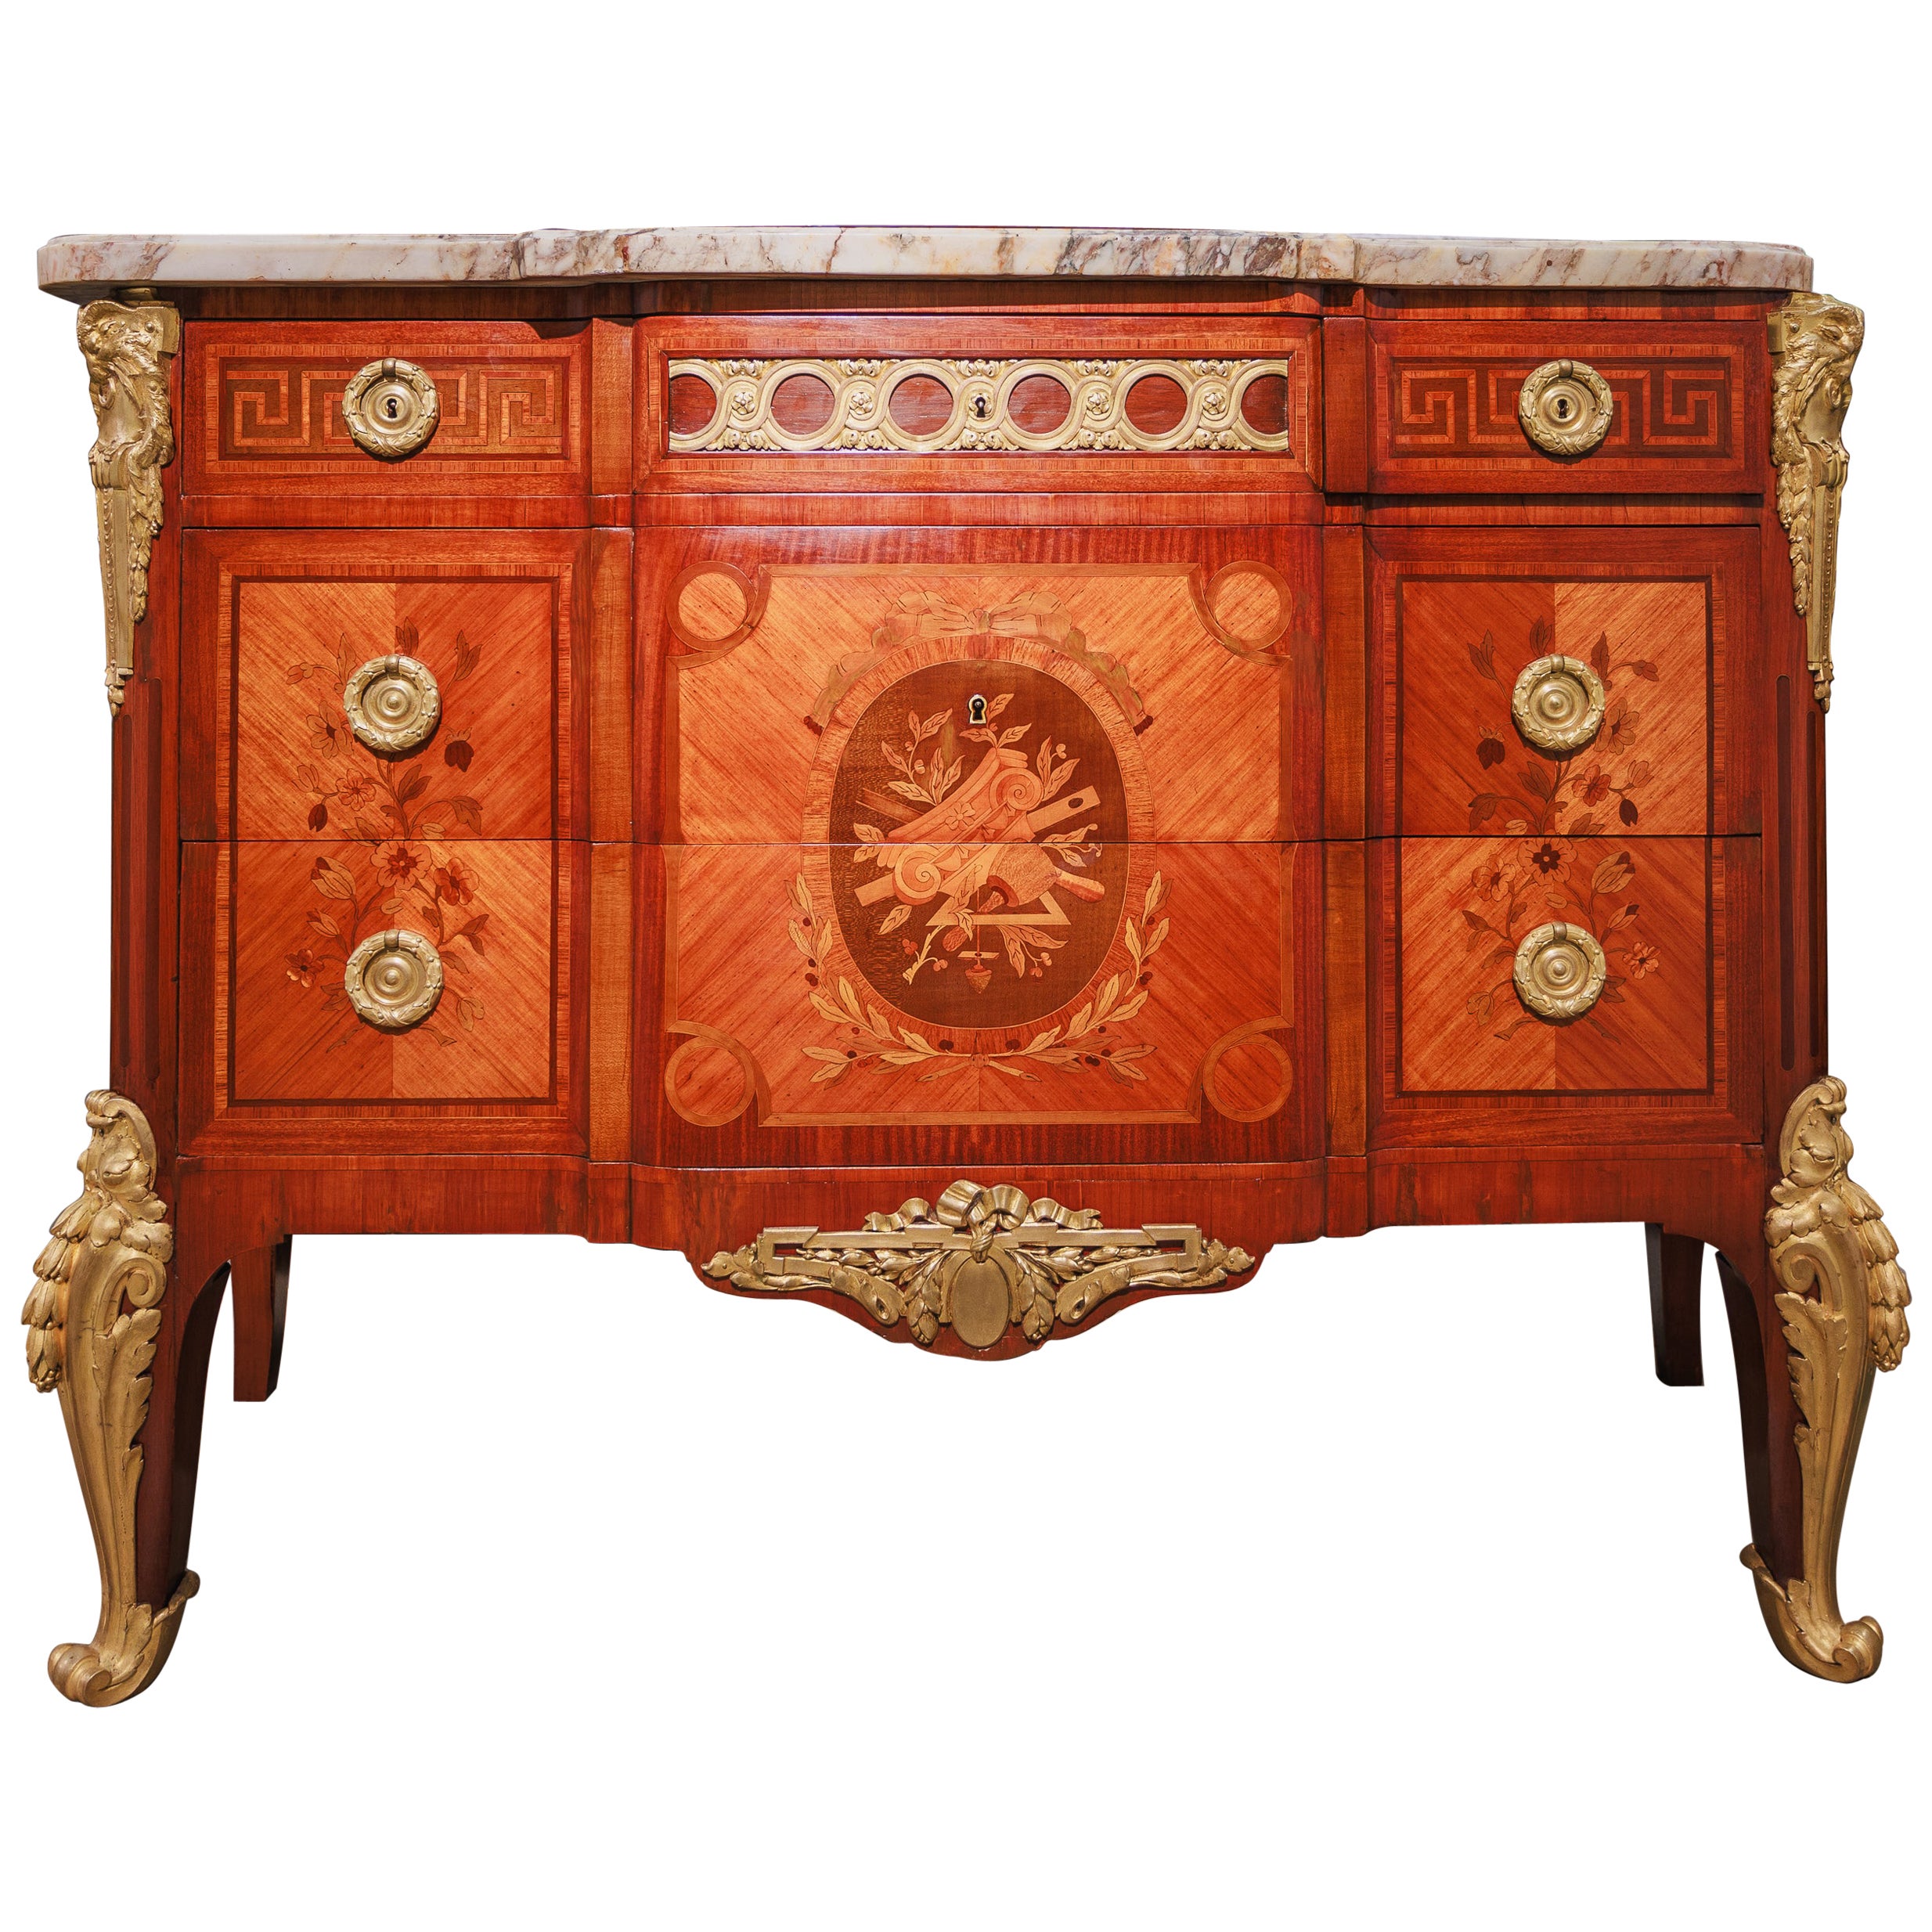 A  19th c French marquetry and gilt bronze mounted commode signed Henri Picard